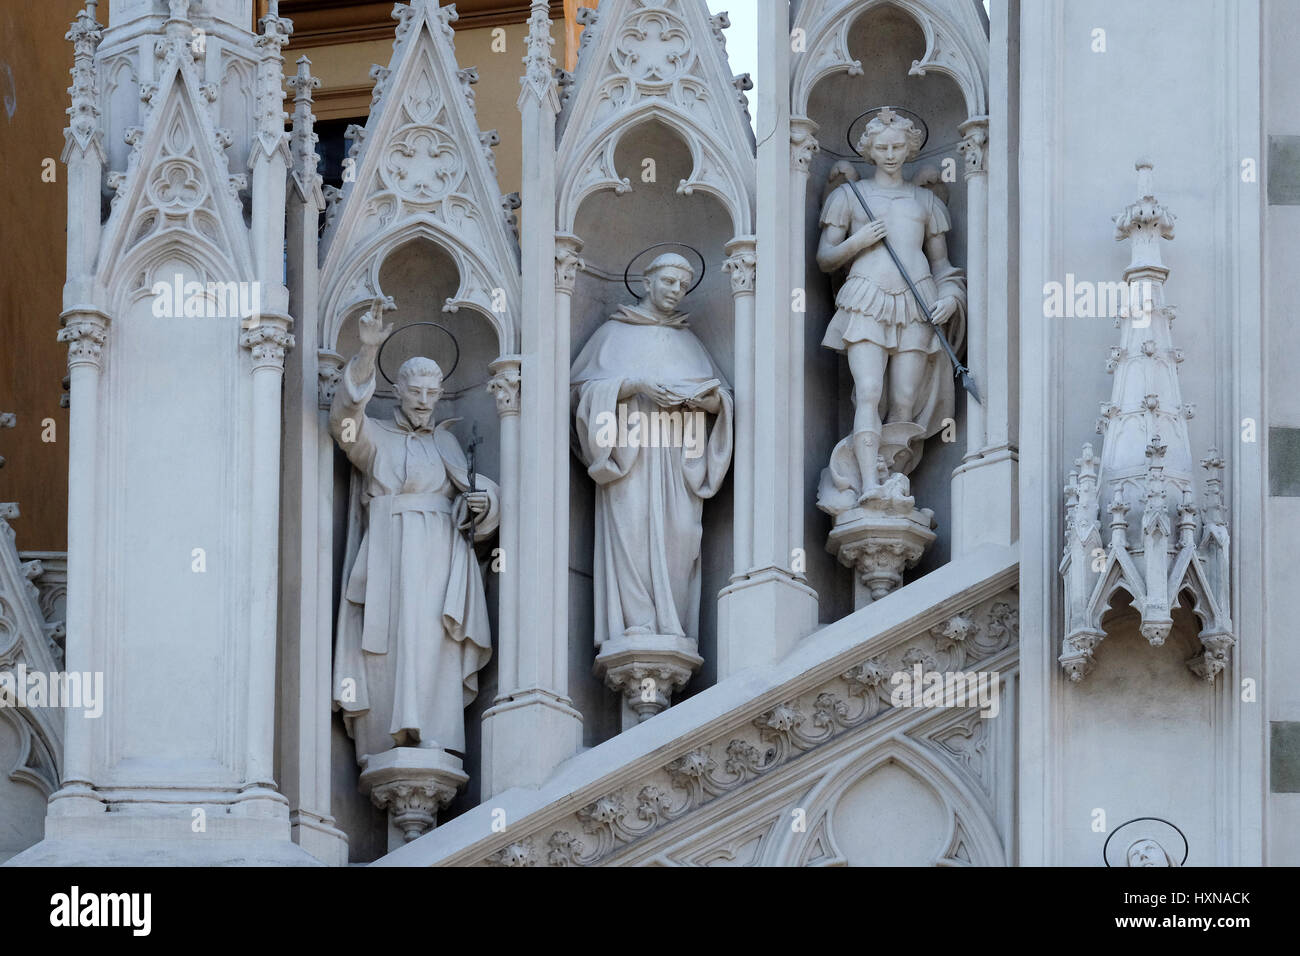 Statues of St. Francis Xavier, Dominic of Guzman and Michael Archangel on the facade of Sacro Cuore del Suffragio church i Stock Photo